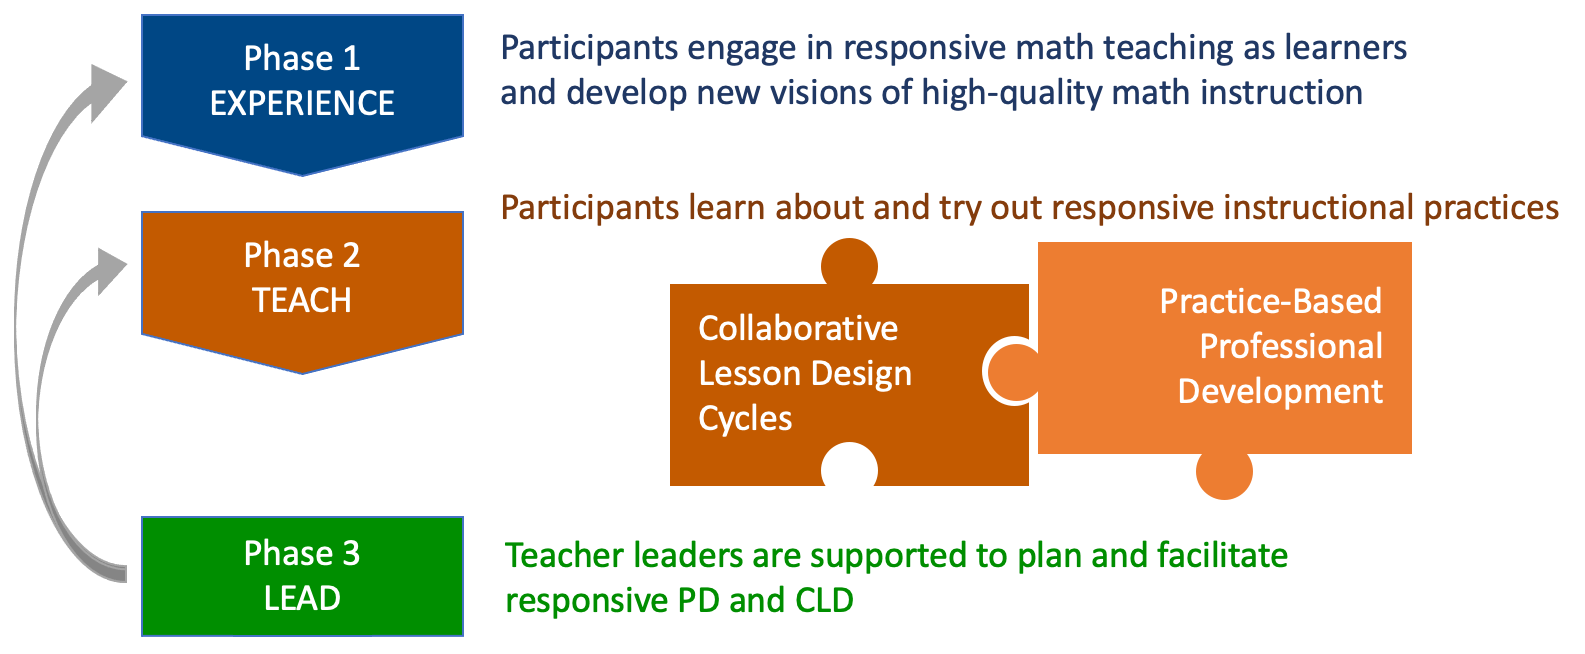 Experience Responsive Math Teaching as a learner, reflect on that experience in order to understand how to teach responsively, and begin to make adjustments to math instruction (Math Circle).

  Teach. Analyze and rehearse Responsive Math Teaching skills, then collaboratively plan, enact, and reflect on the implementation of Responsive Math lessons with peer partners (Collaborative Lesson Design).
  
  Lead by facilitation professional development and supporting other teachers across the network as they adopt and refine Responsive Math Teaching practices (Mentoring, Leading PD).
  